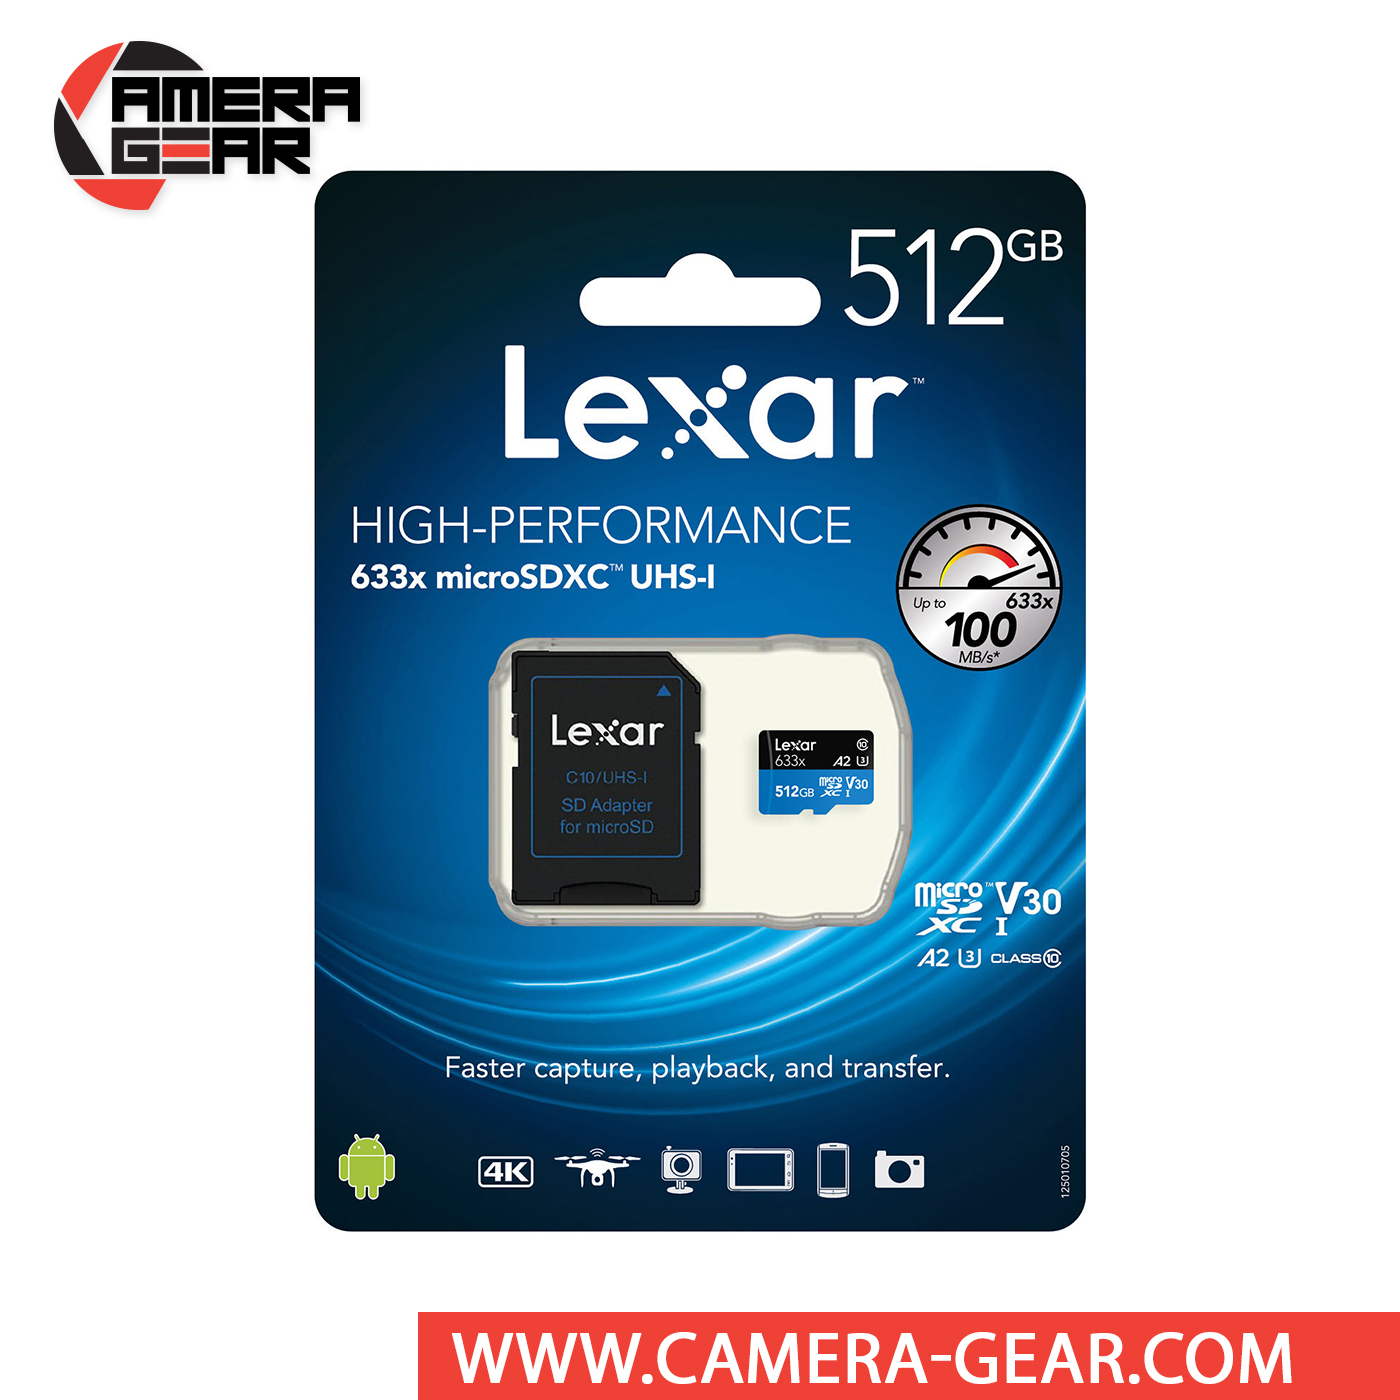 Lexar 512GB UHS-I microSDXC Memory Card with SD Adapter